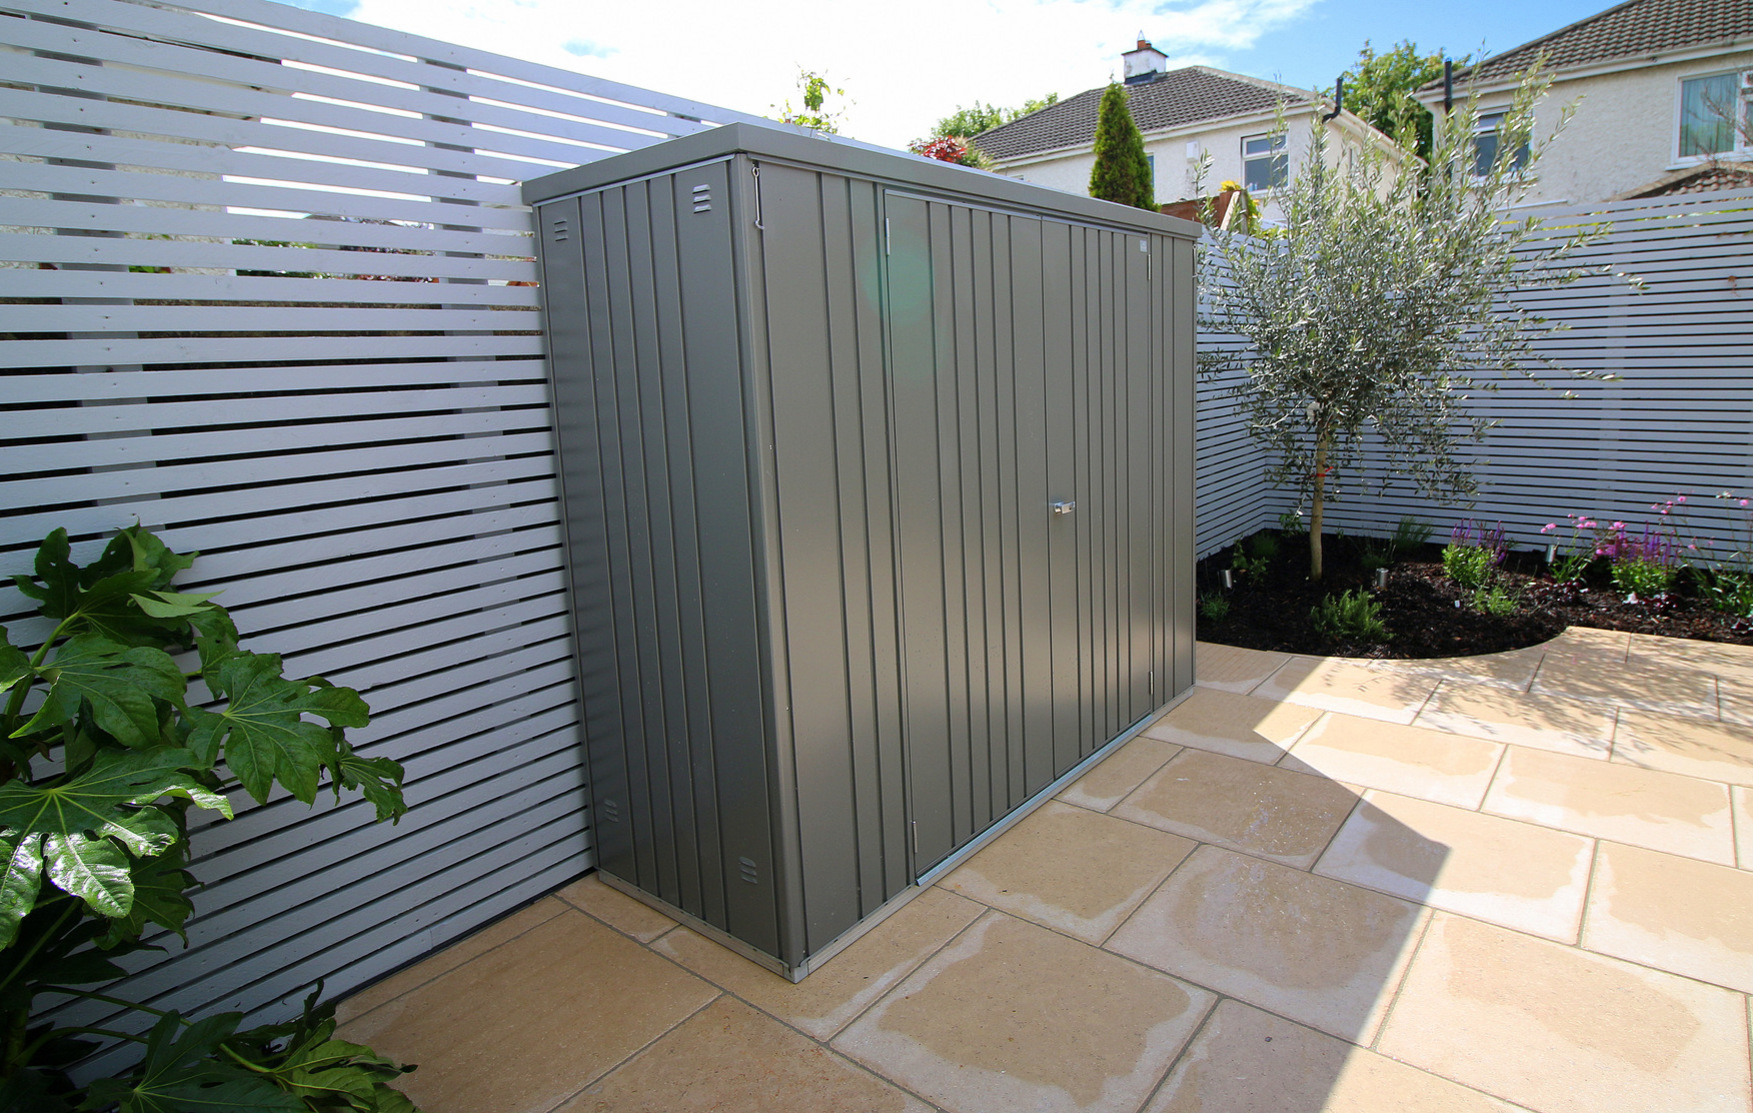 The superb quality and style of the Biohort Equipment Locker 230 in metallic quartz grey  | supplied + installed in Balinteer by Owen Chubb Landscapers. Tel 087-2306 128.